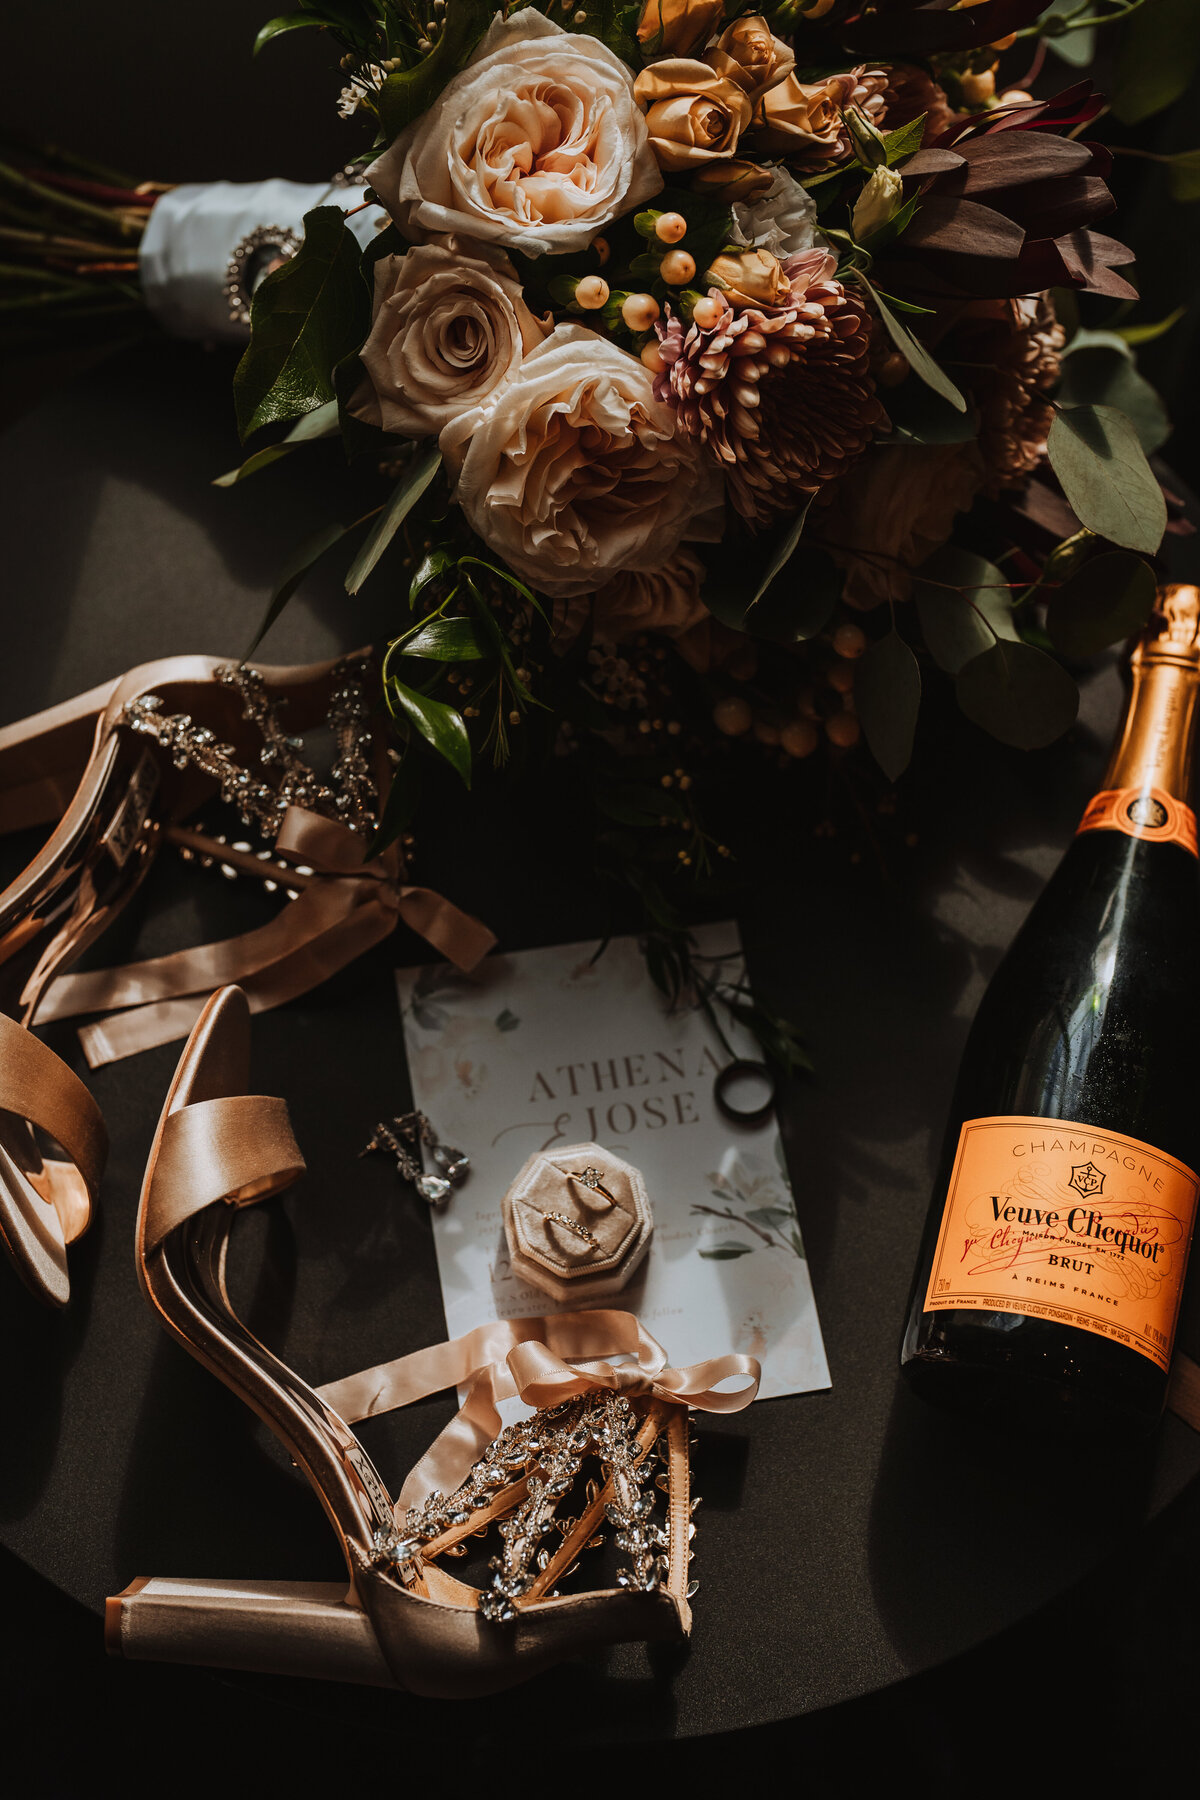 Photo of brides wedding details including rings shoes invitation and champagne bottle of veuve clicquot